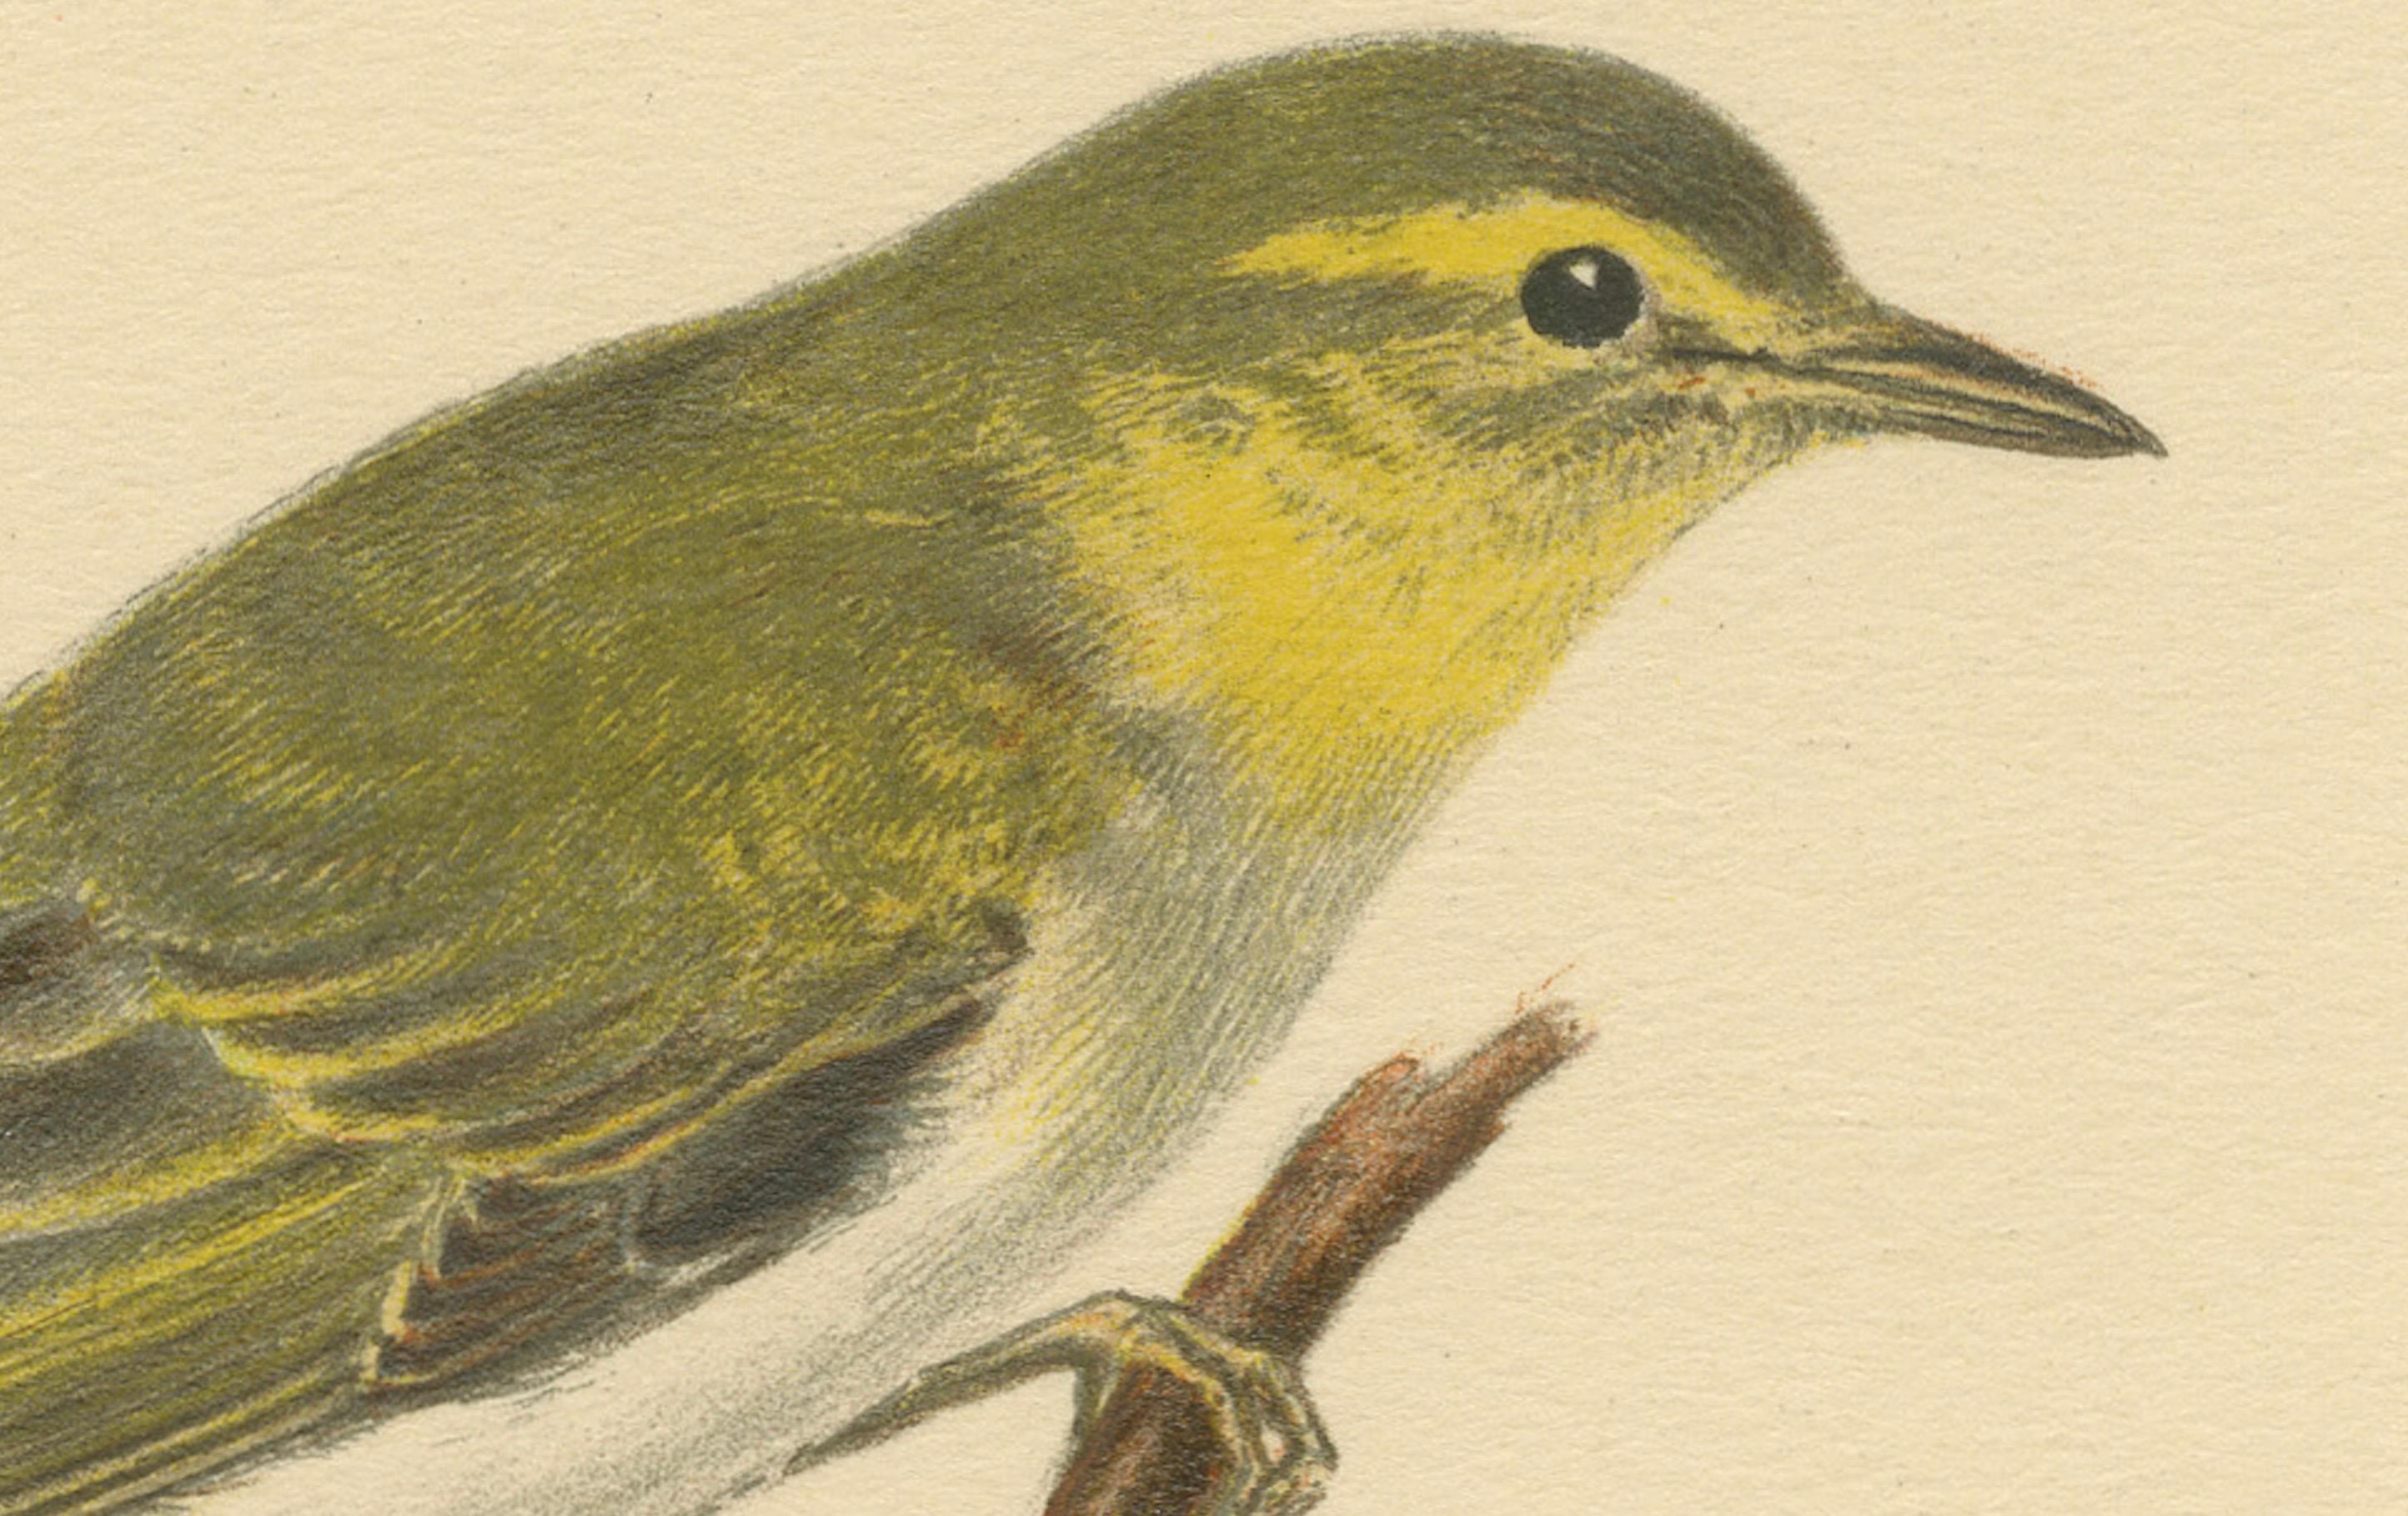 The image is of an antique bird print titled 'Phylloscopus Sibilatrix', which is often confused with the common chiffchaff but is actually depicting a Wood Warbler. The bird is perched on a branch, depicted in a detailed and naturalistic manner.